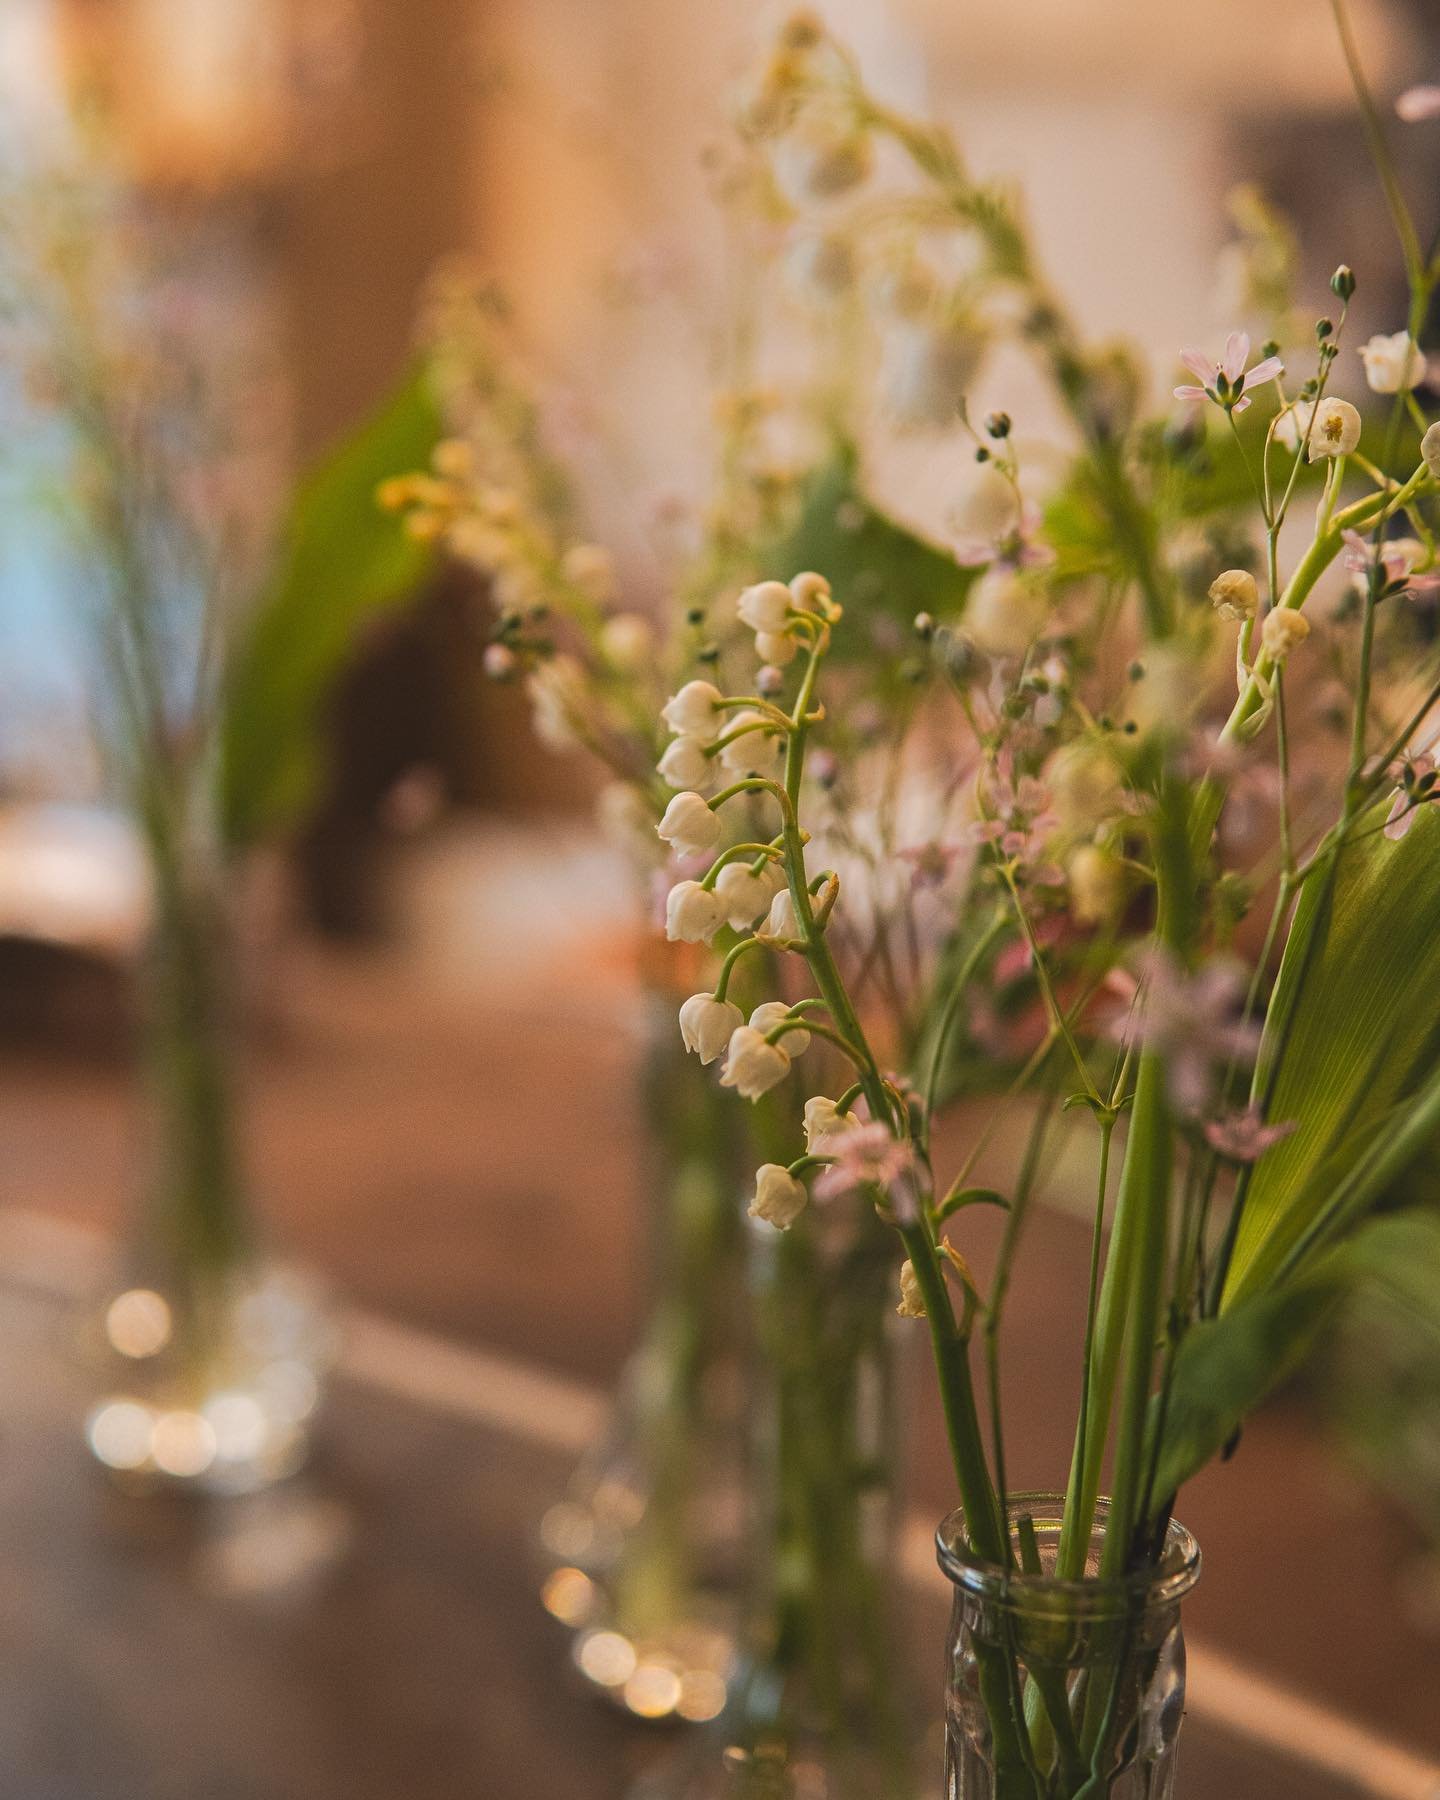 Lily of the valley stems paired with pink forget me nots🌿  Happy May 1st!